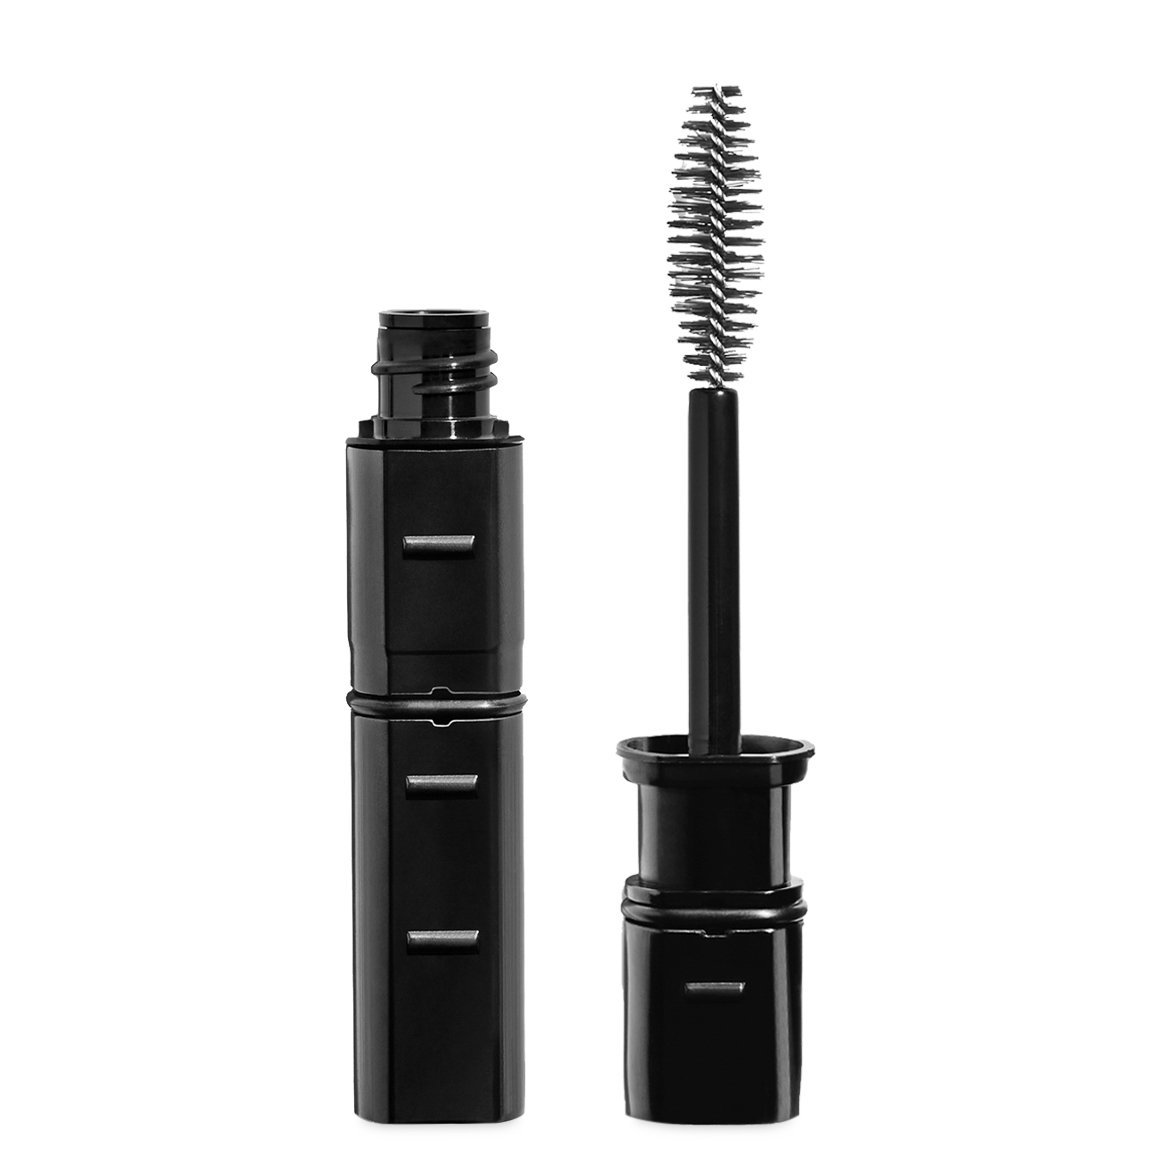 Kjaer Weis Im-Possible Mascara Refill alternative view 1 - product swatch.